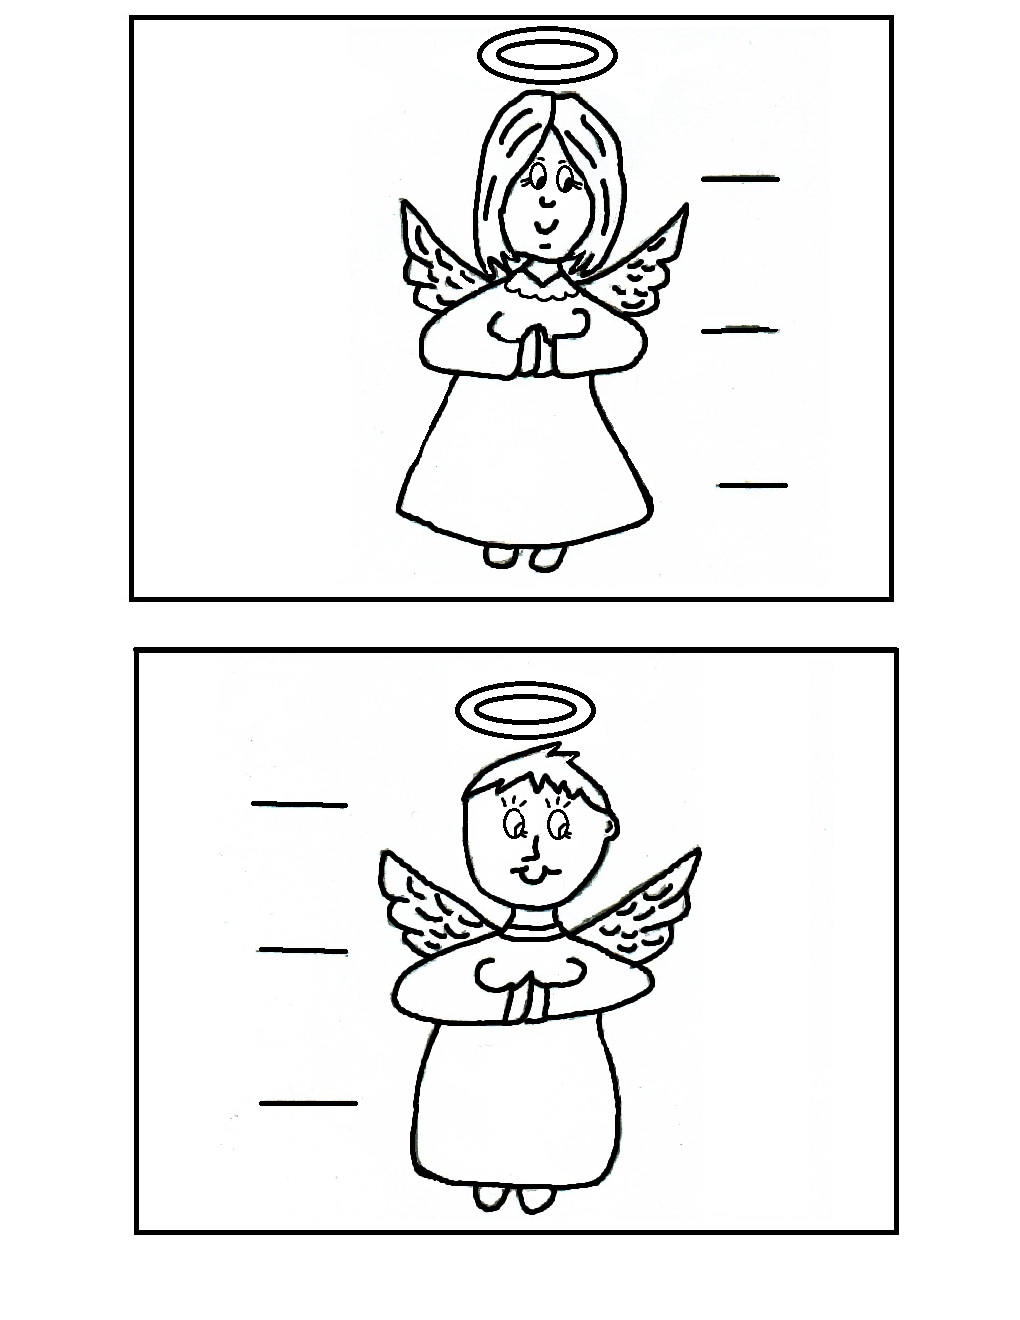 jacobs ladder in the bible coloring pages - photo #32